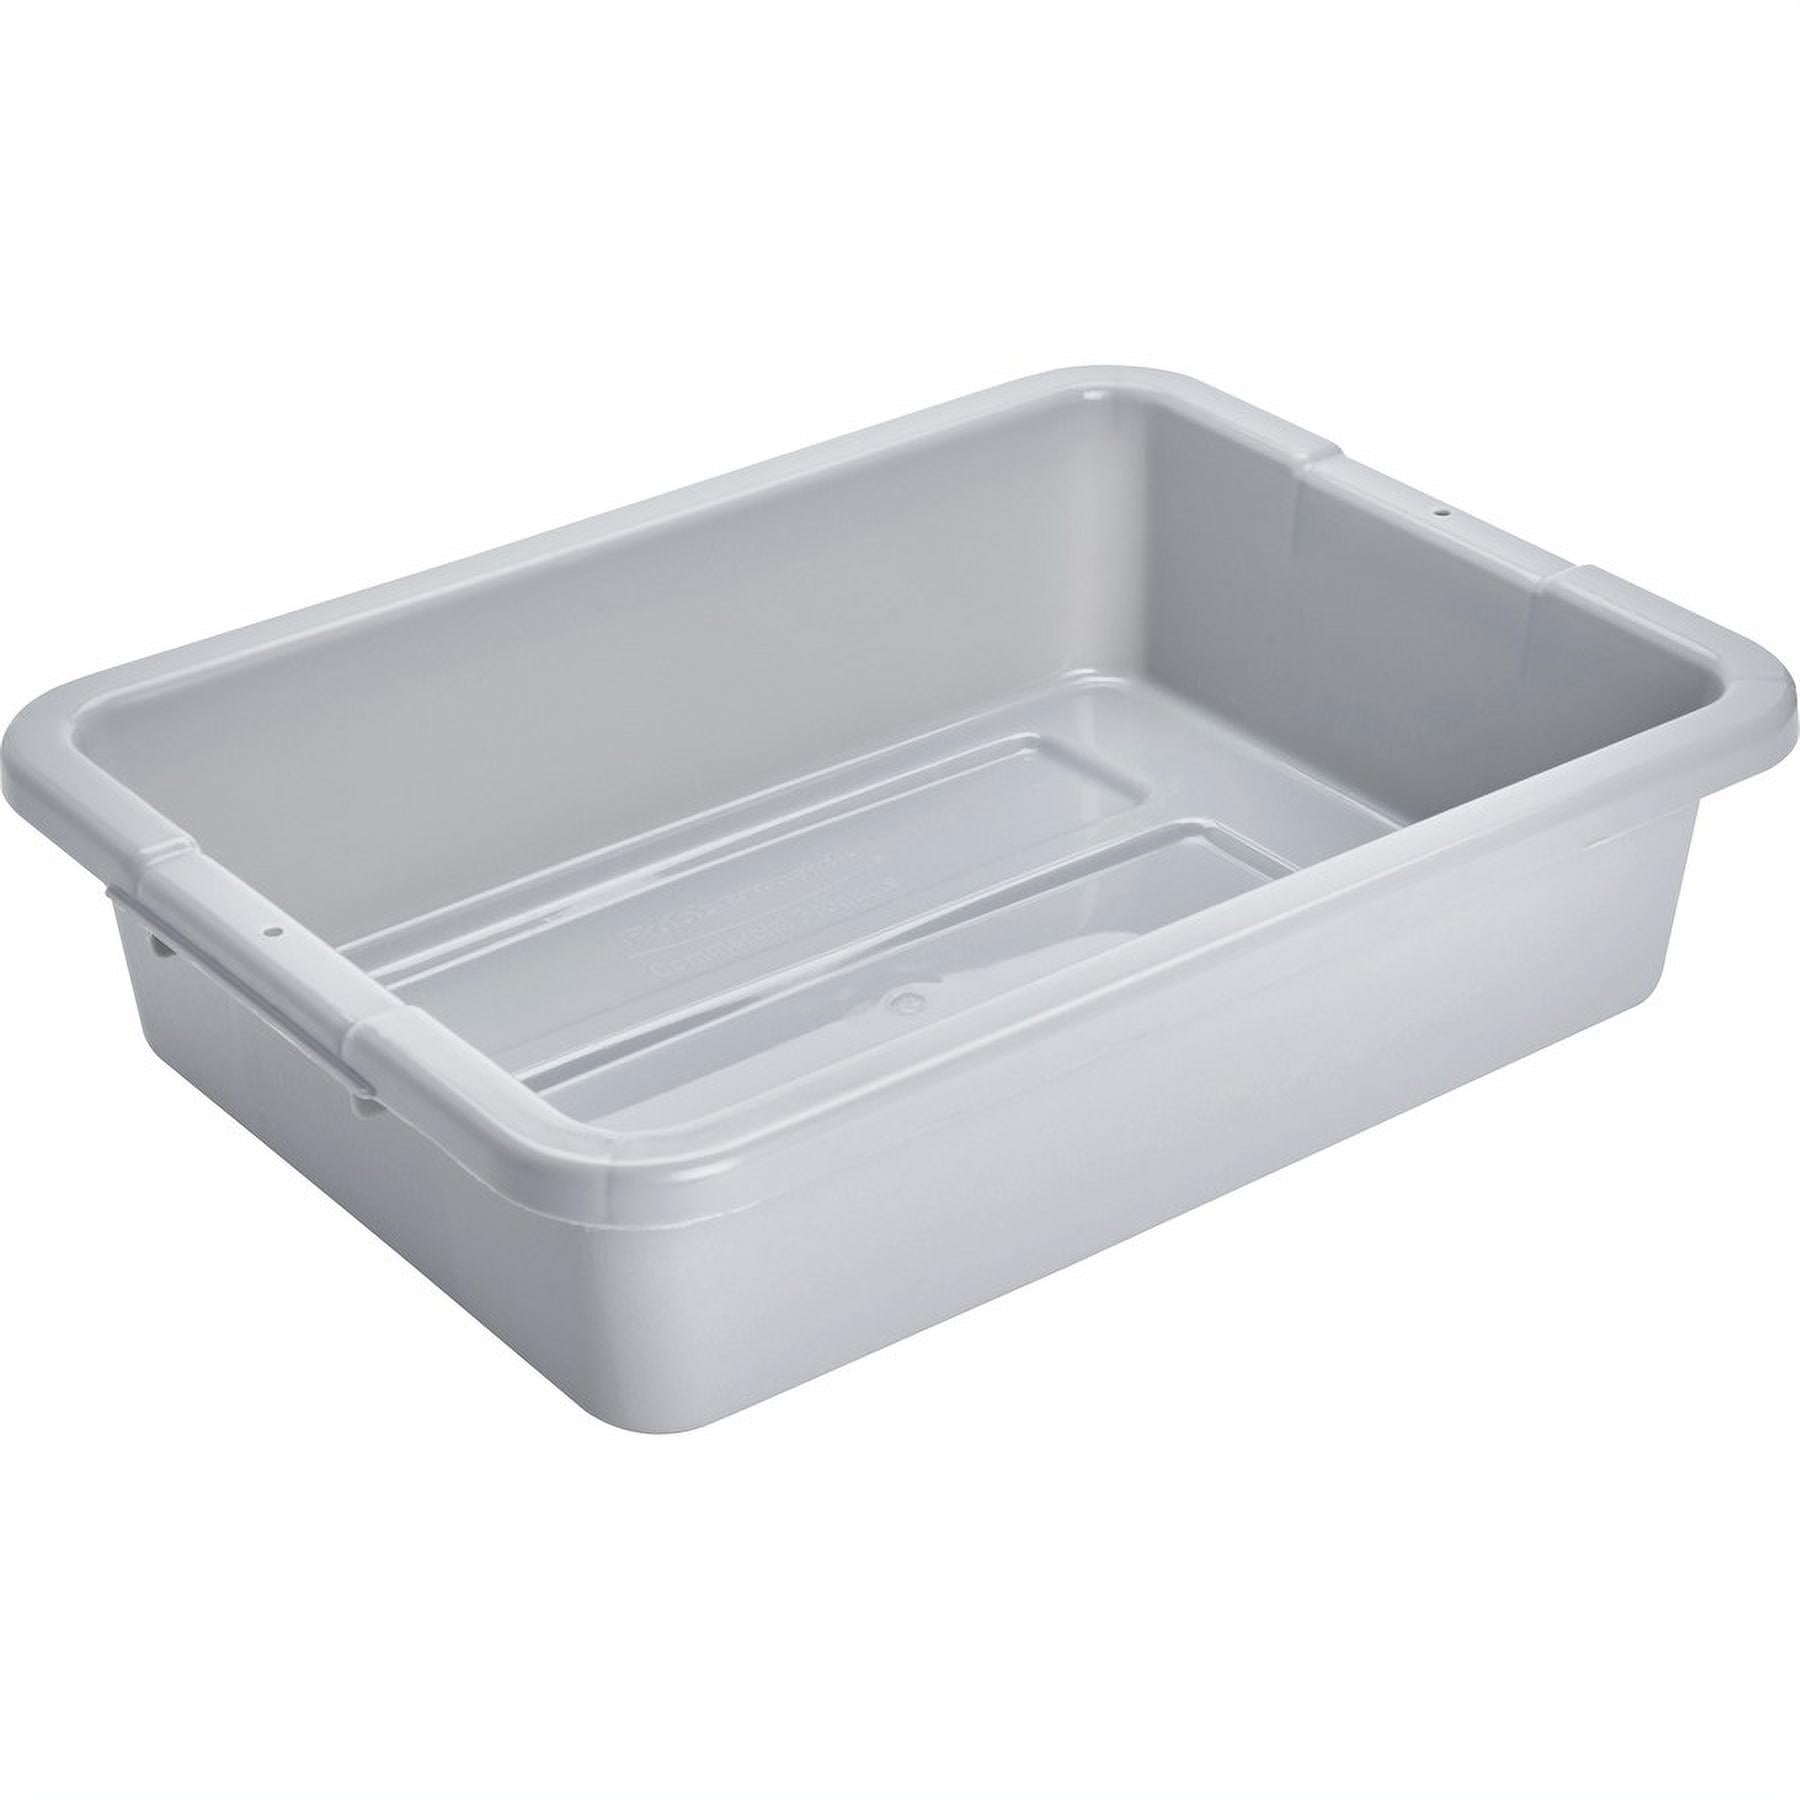 Gray Plastic Utility Bus Box Nicesh 4-Pack 32 L Large Commercial Bus Tubs